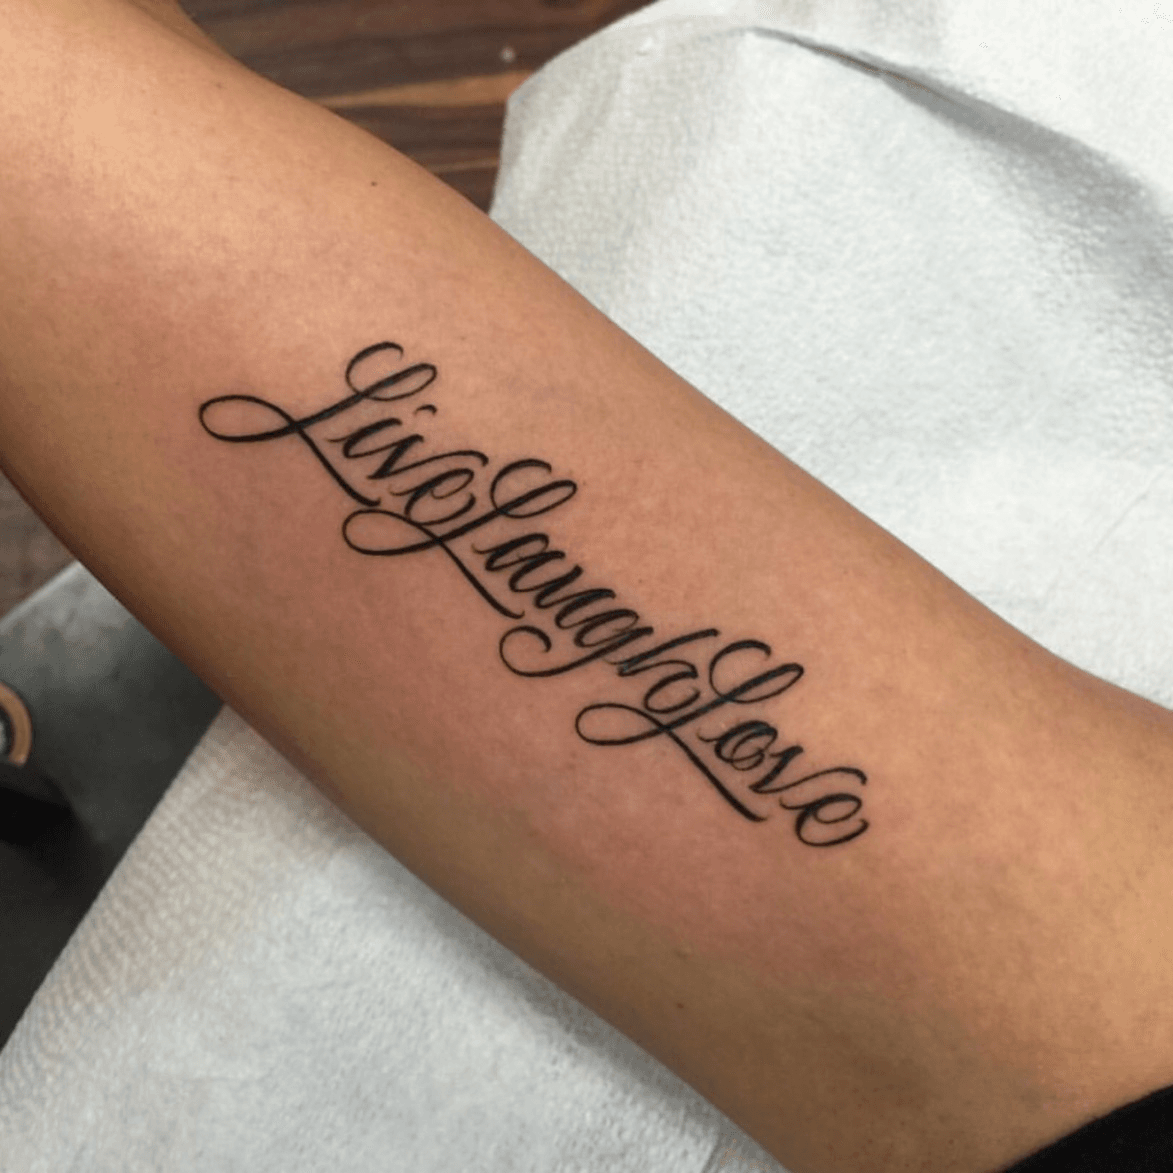 20 Tattoo Designs That Scream I Have No Creativity According To People  Online  DeMilked